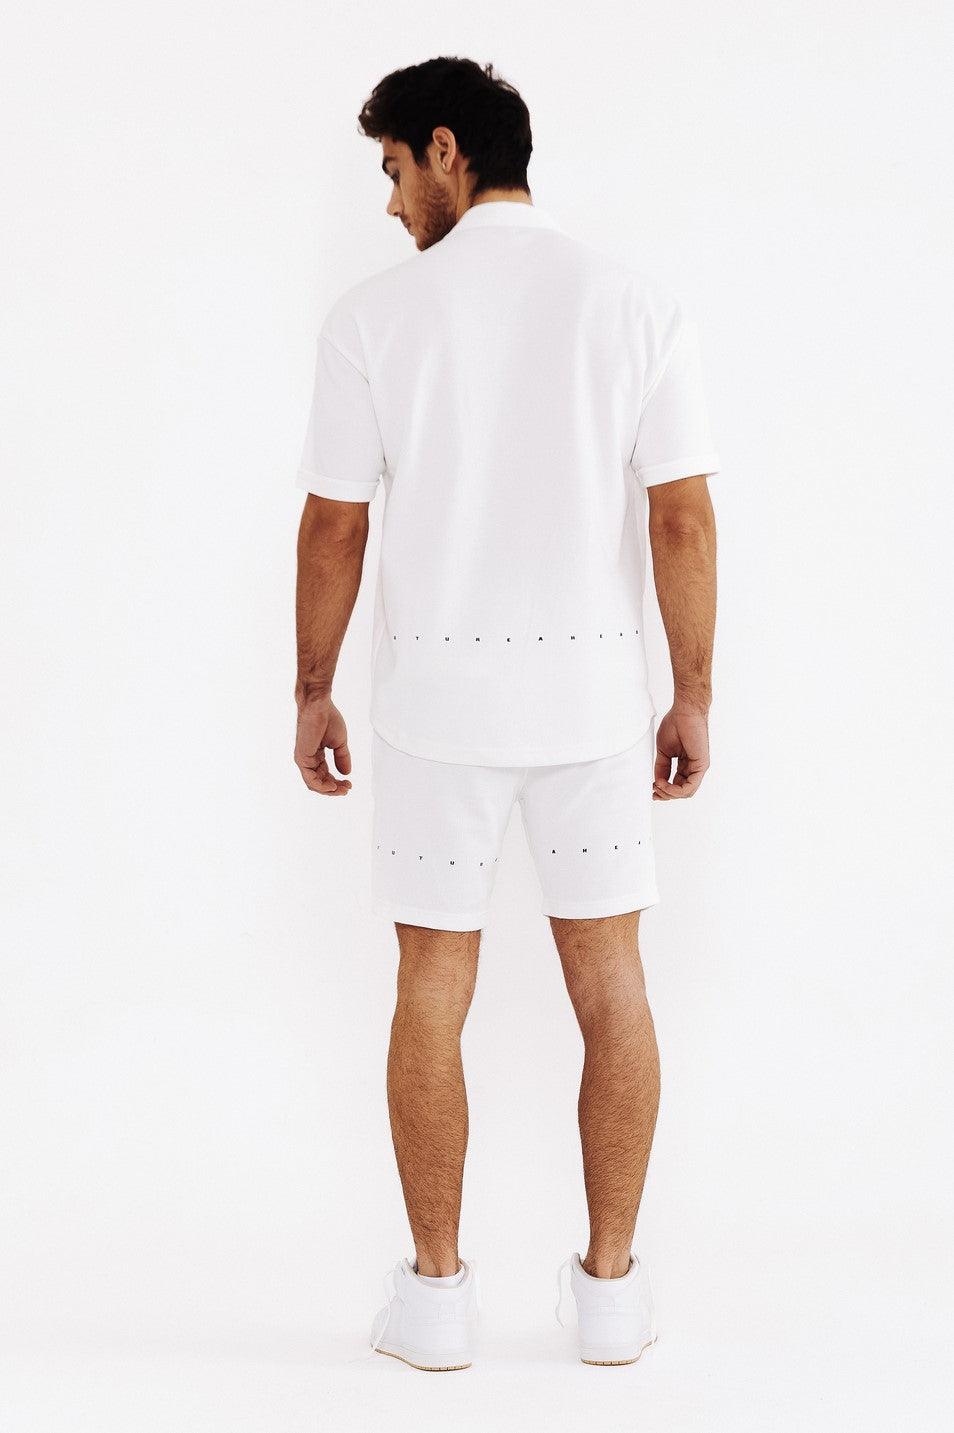 Men's White Shirt & Shorts Outfit THIMOON